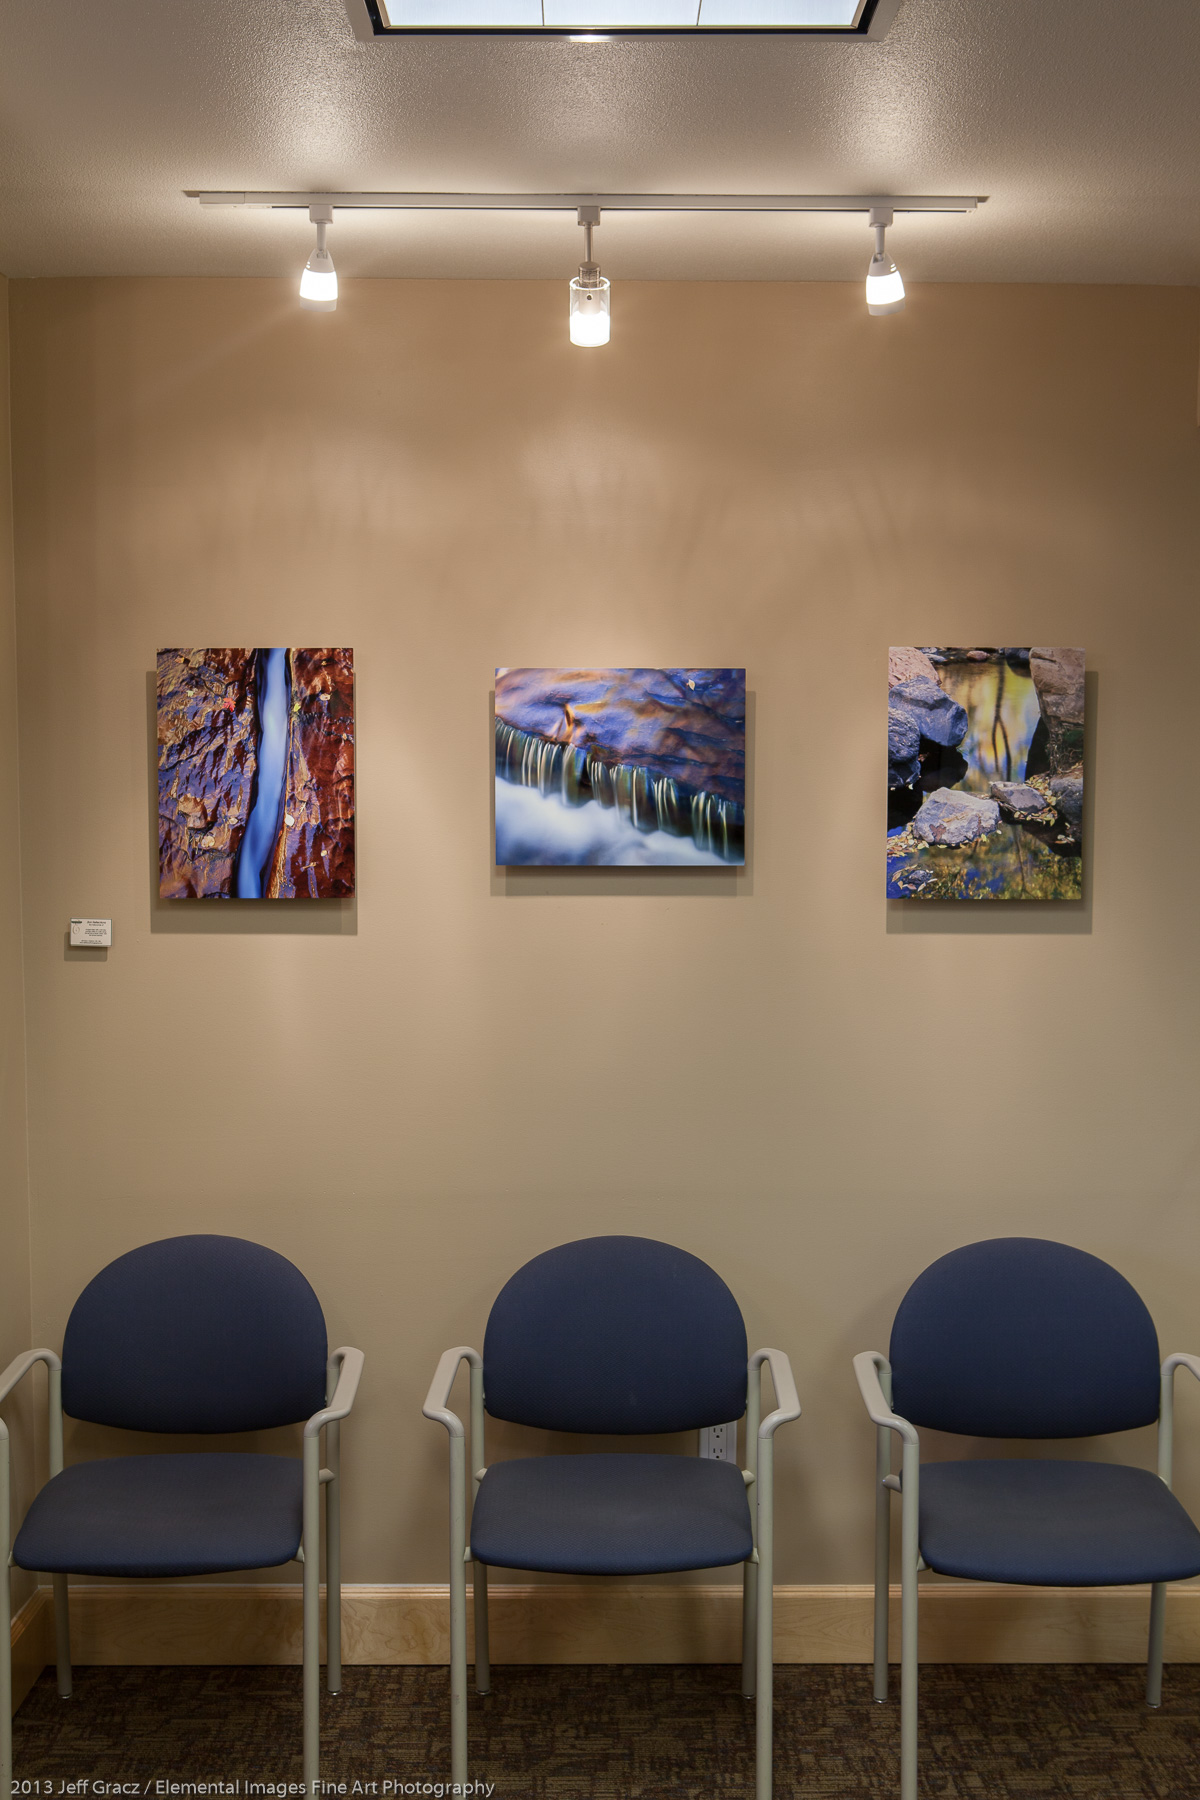 Doctor's office example | Portland | OR | USA - © 2013 Jeff Gracz / Elemental Images Fine Art Photography - All Rights Reserved Worldwide